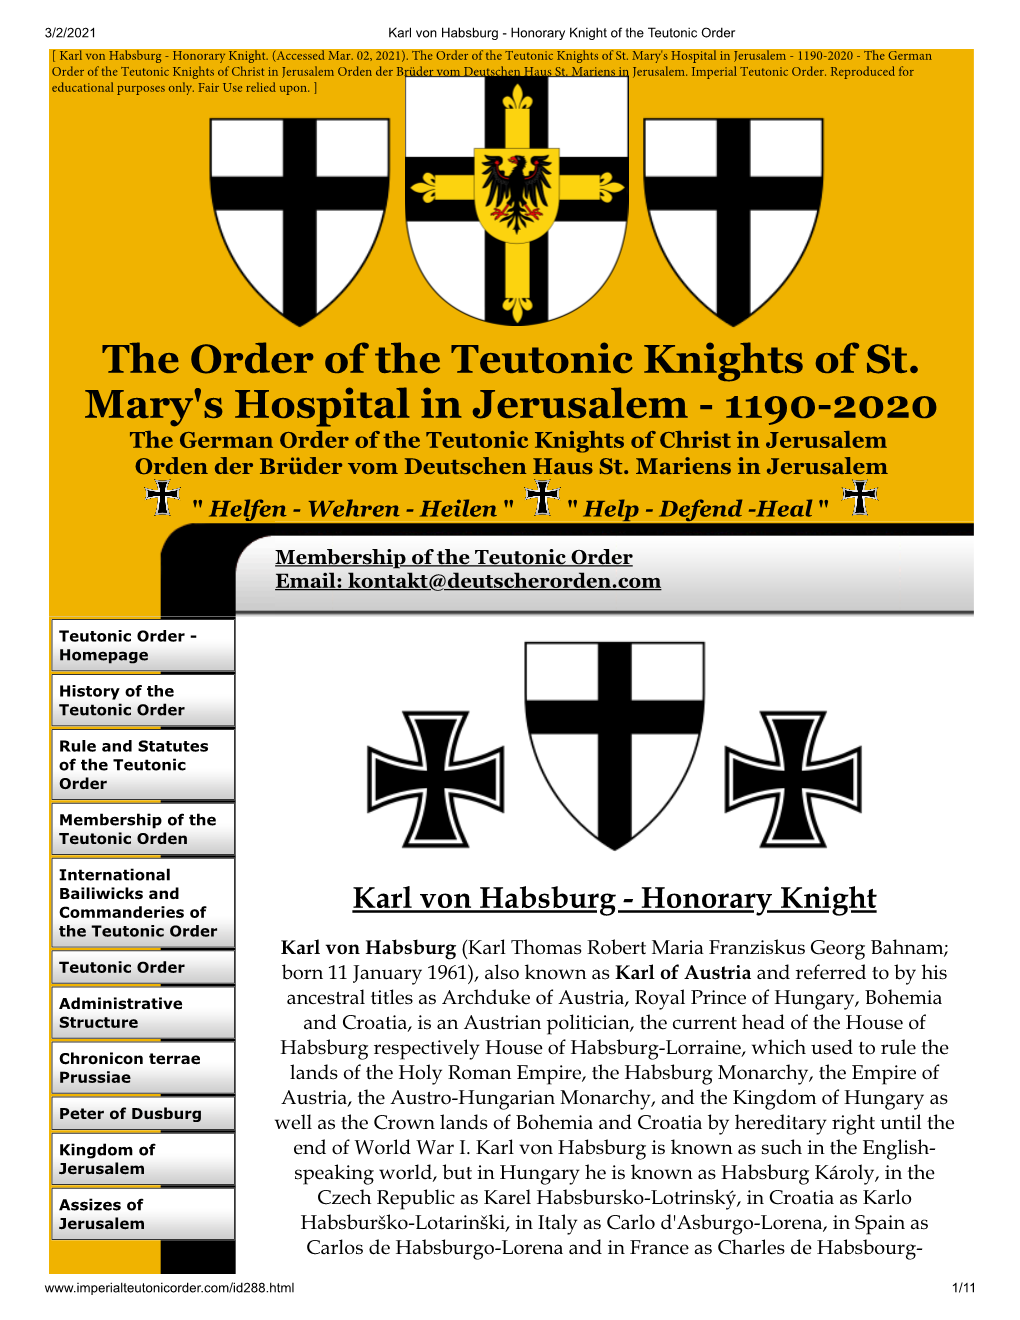 The Order of the Teutonic Knights of St. Mary's Hospital in Jerusalem